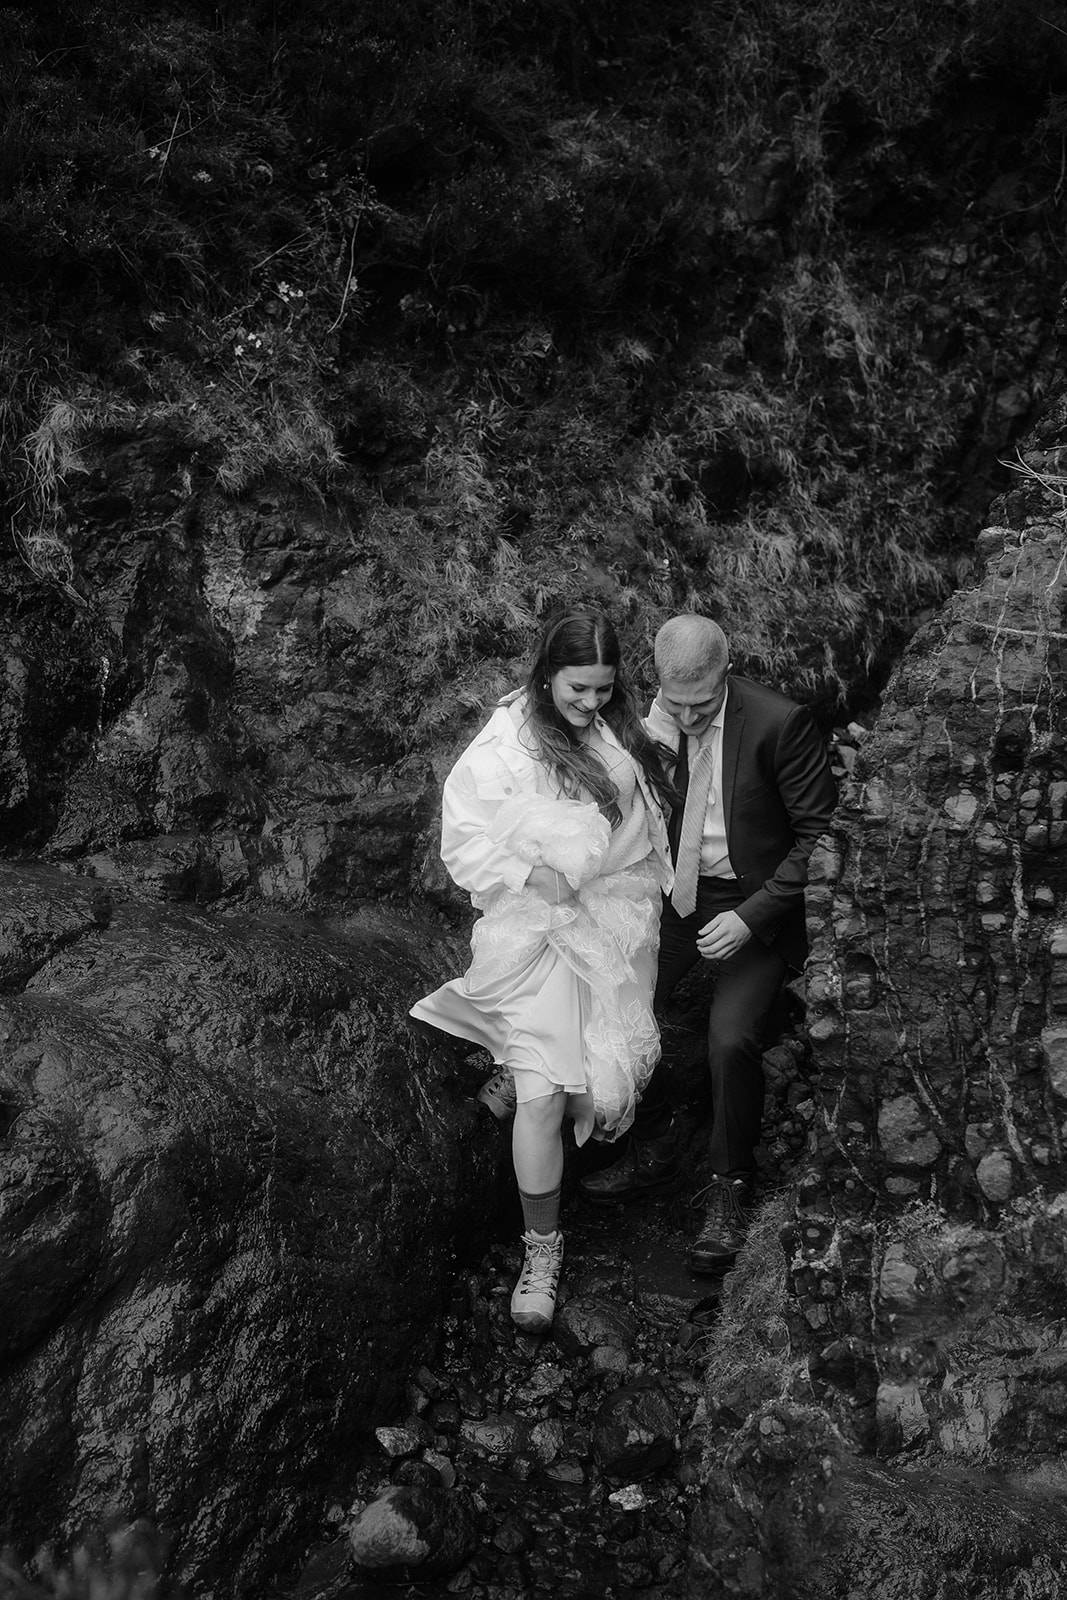 Capture in a tender moment, Emma and Matthew stroll through Quiraing, Isle of Skye during their elopement day.